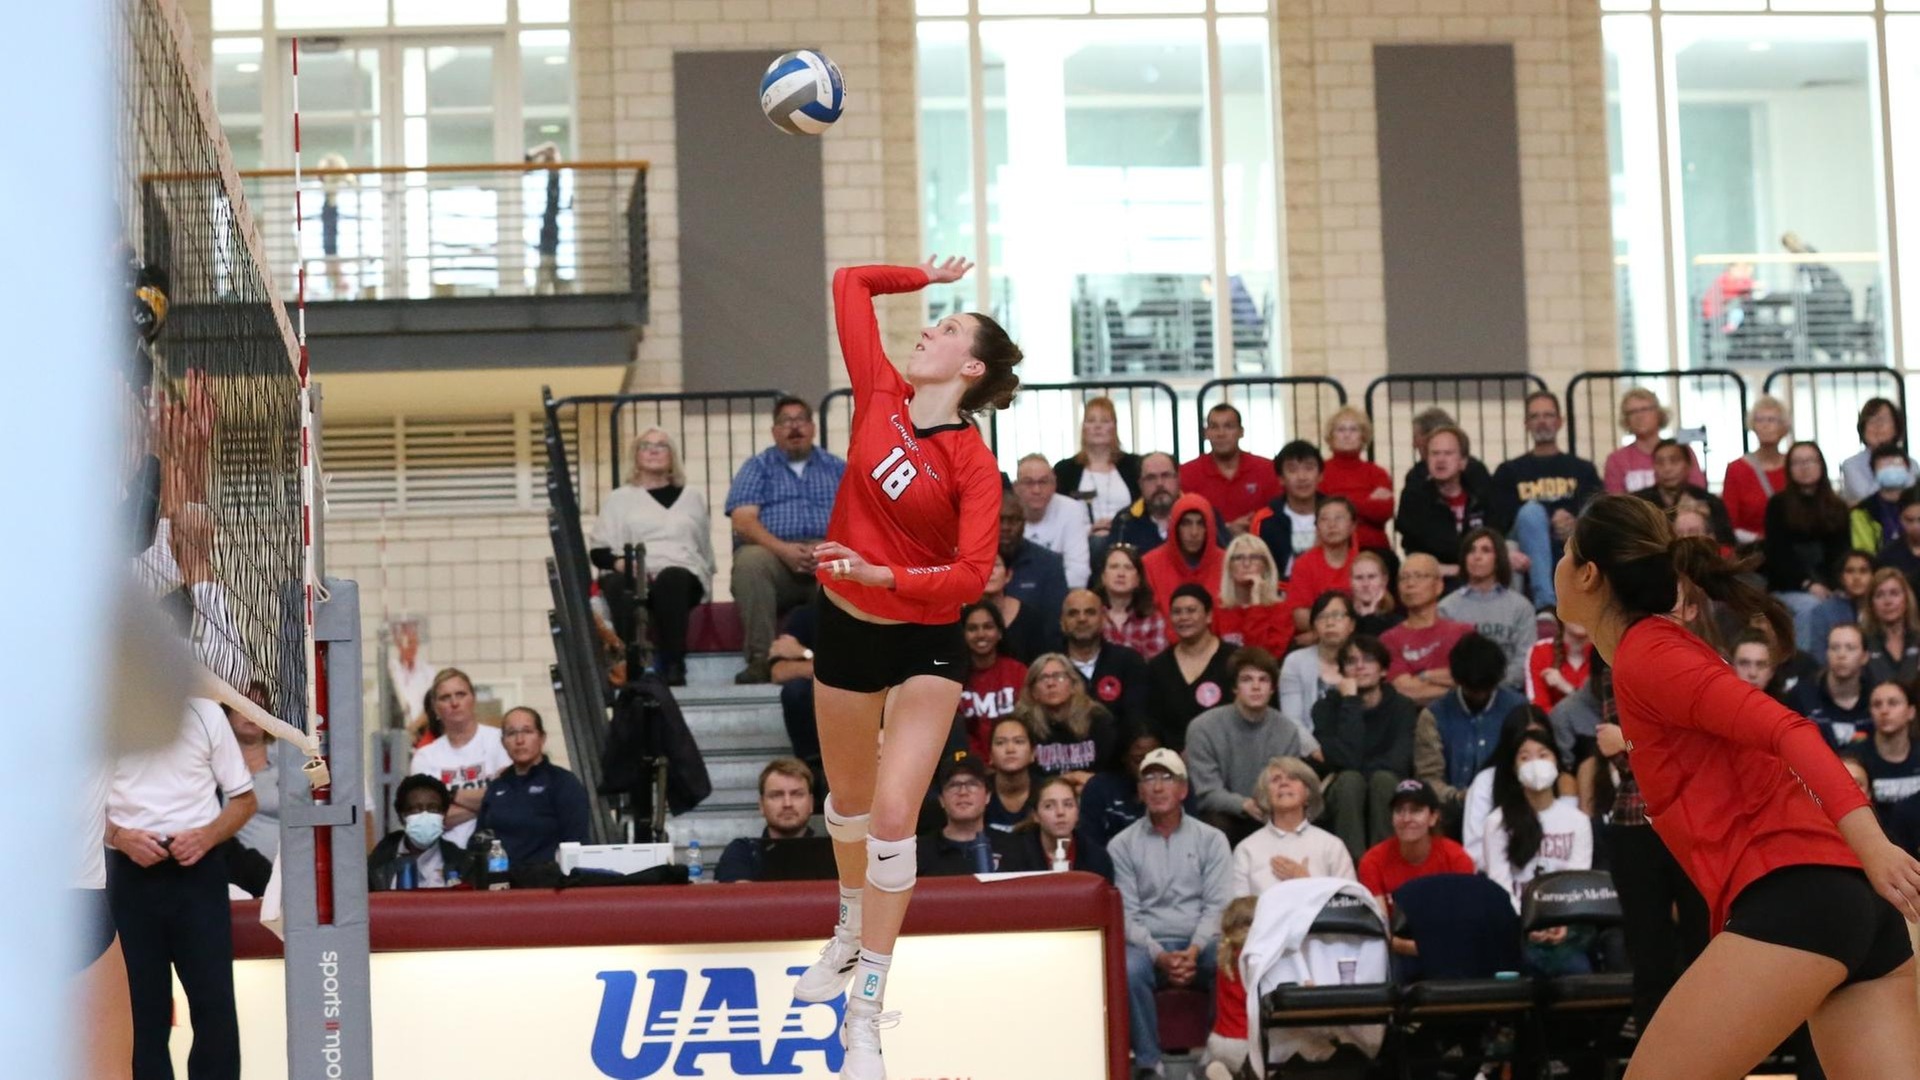 women's volleyball player jumping to hit the ball with her right hand